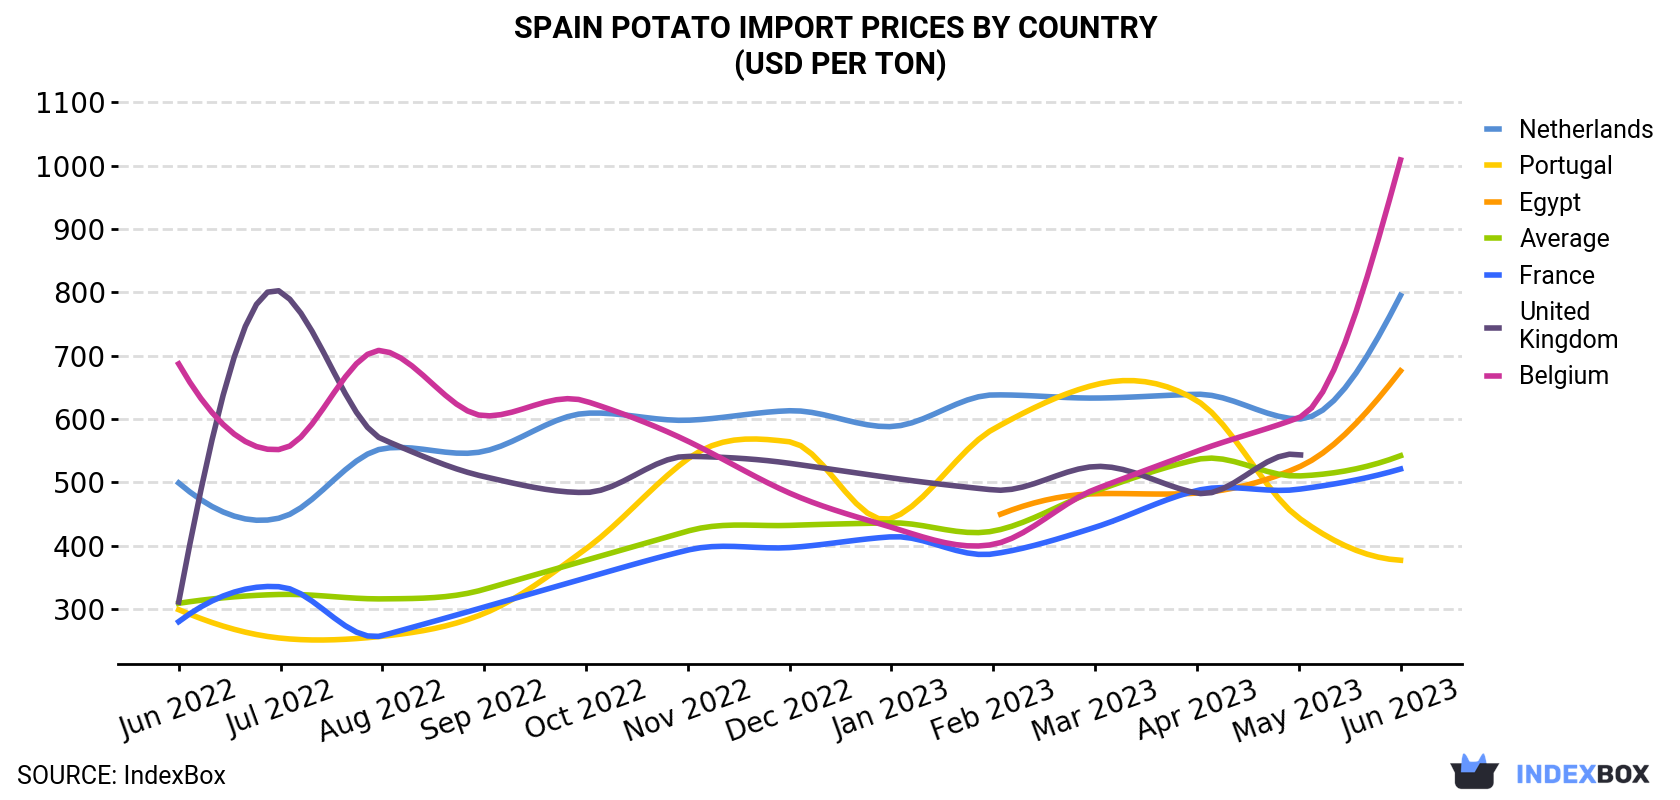 Spain Potato Import Prices By Country (USD Per Ton)